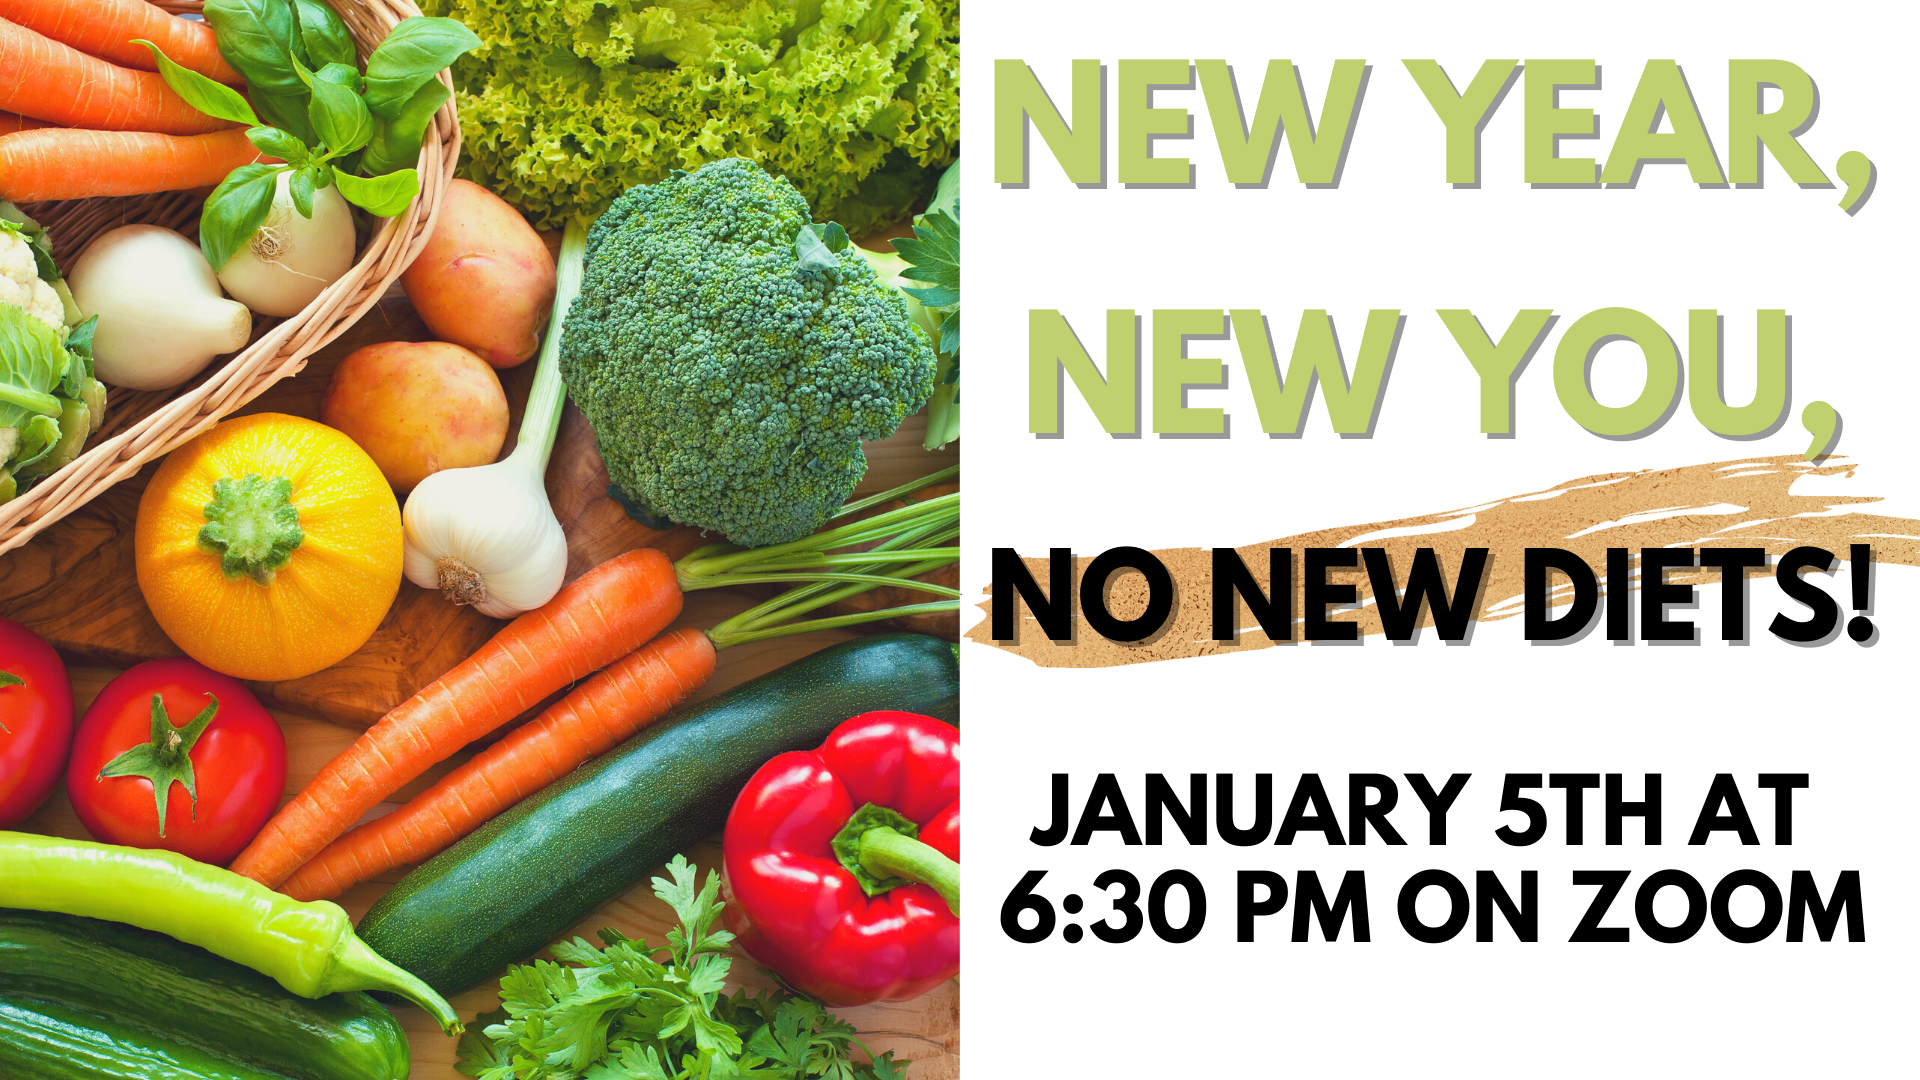 New Year, New You, No New Diets!